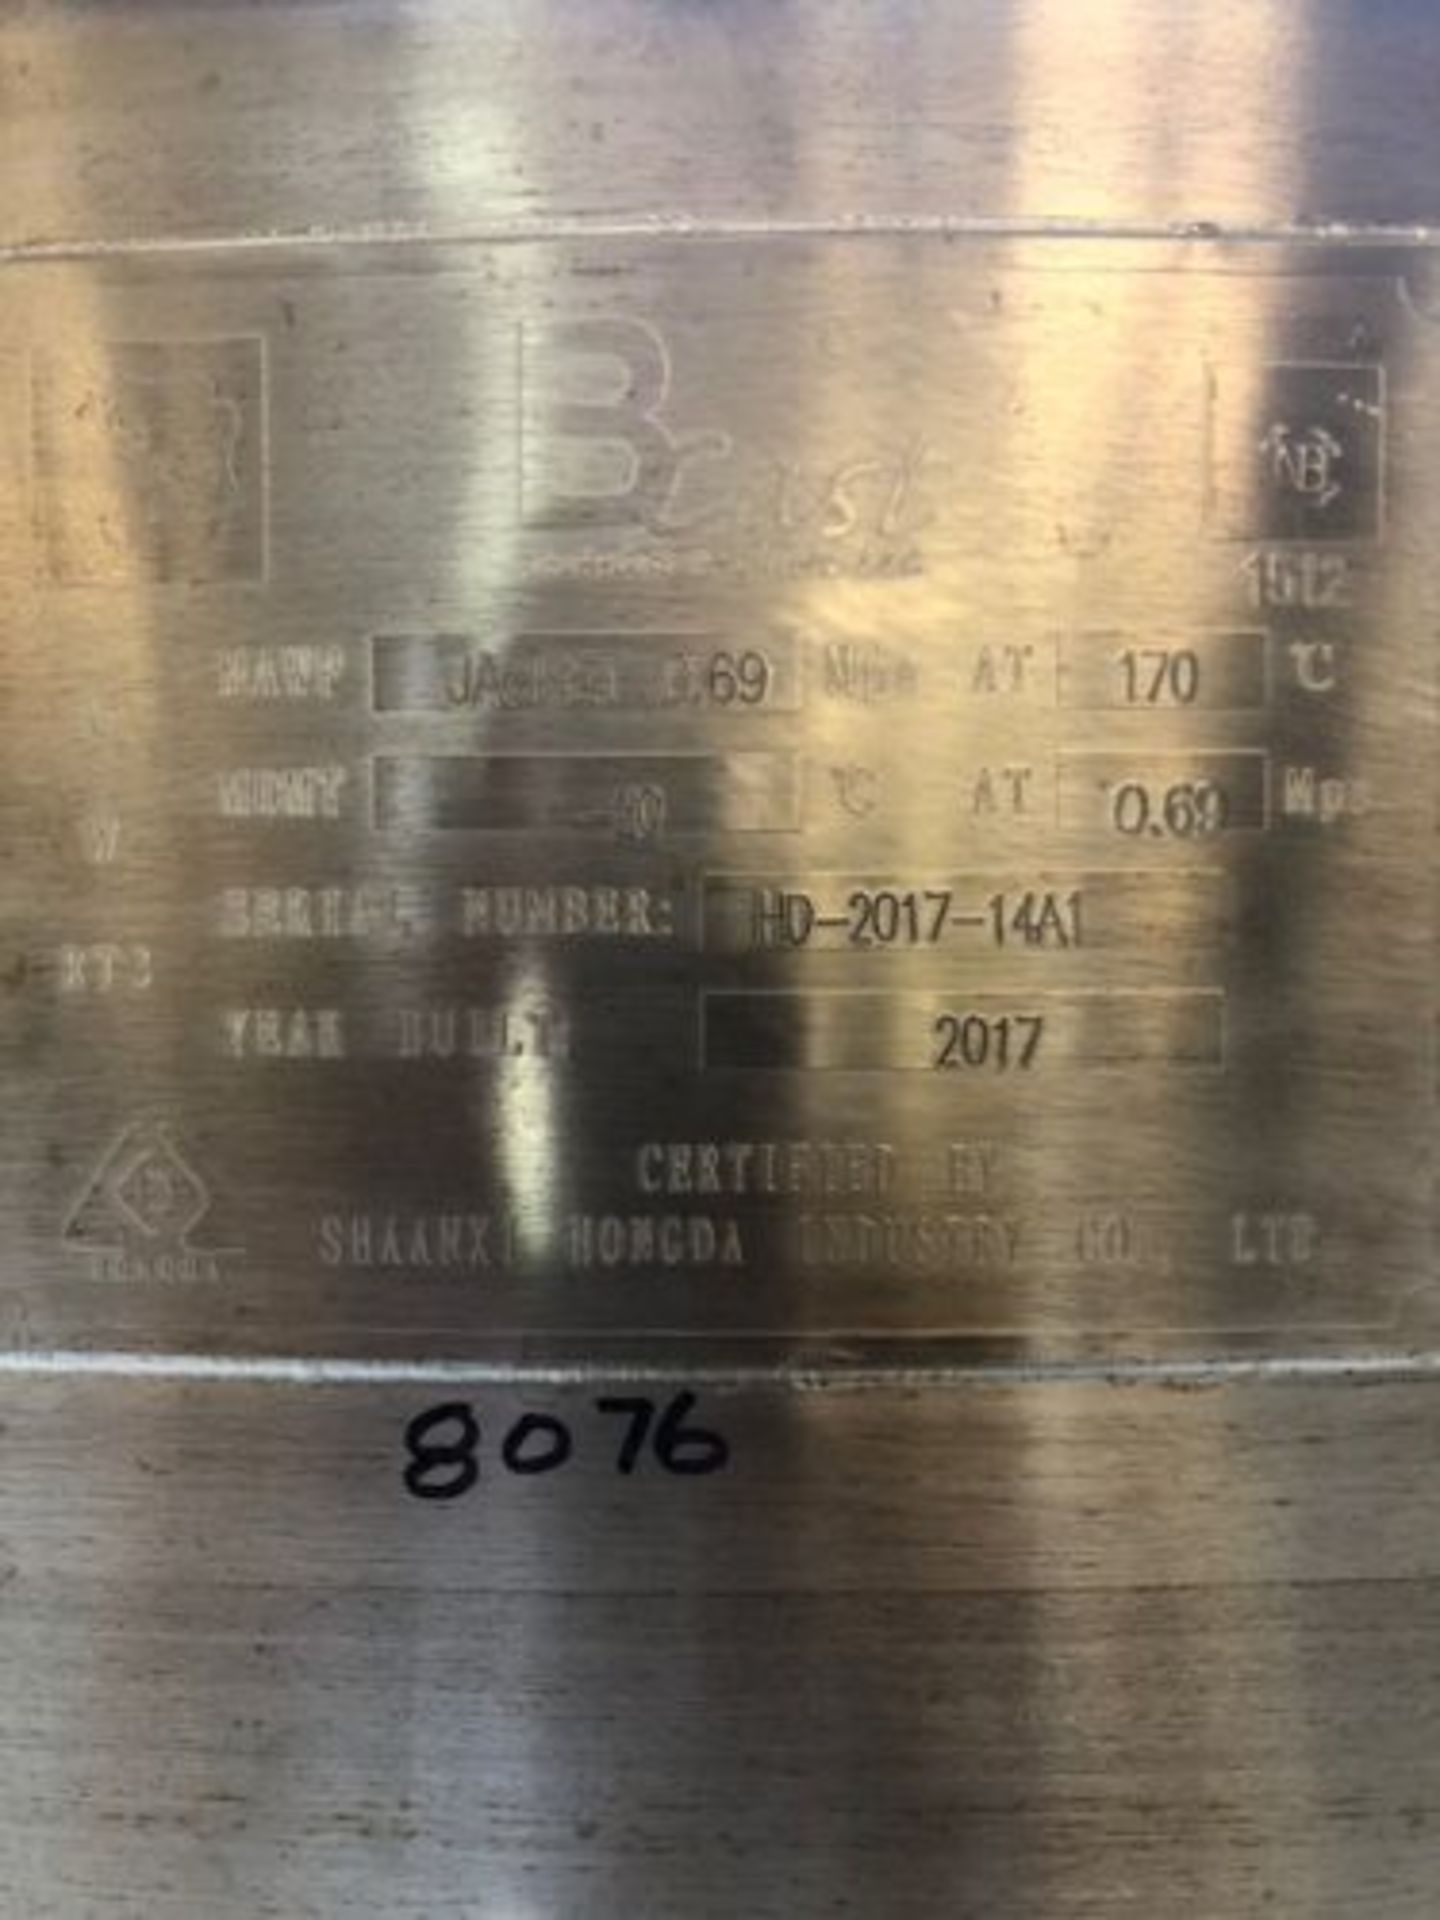 400 gallon BCast stainless steel steam jacketed kettle - Image 2 of 4